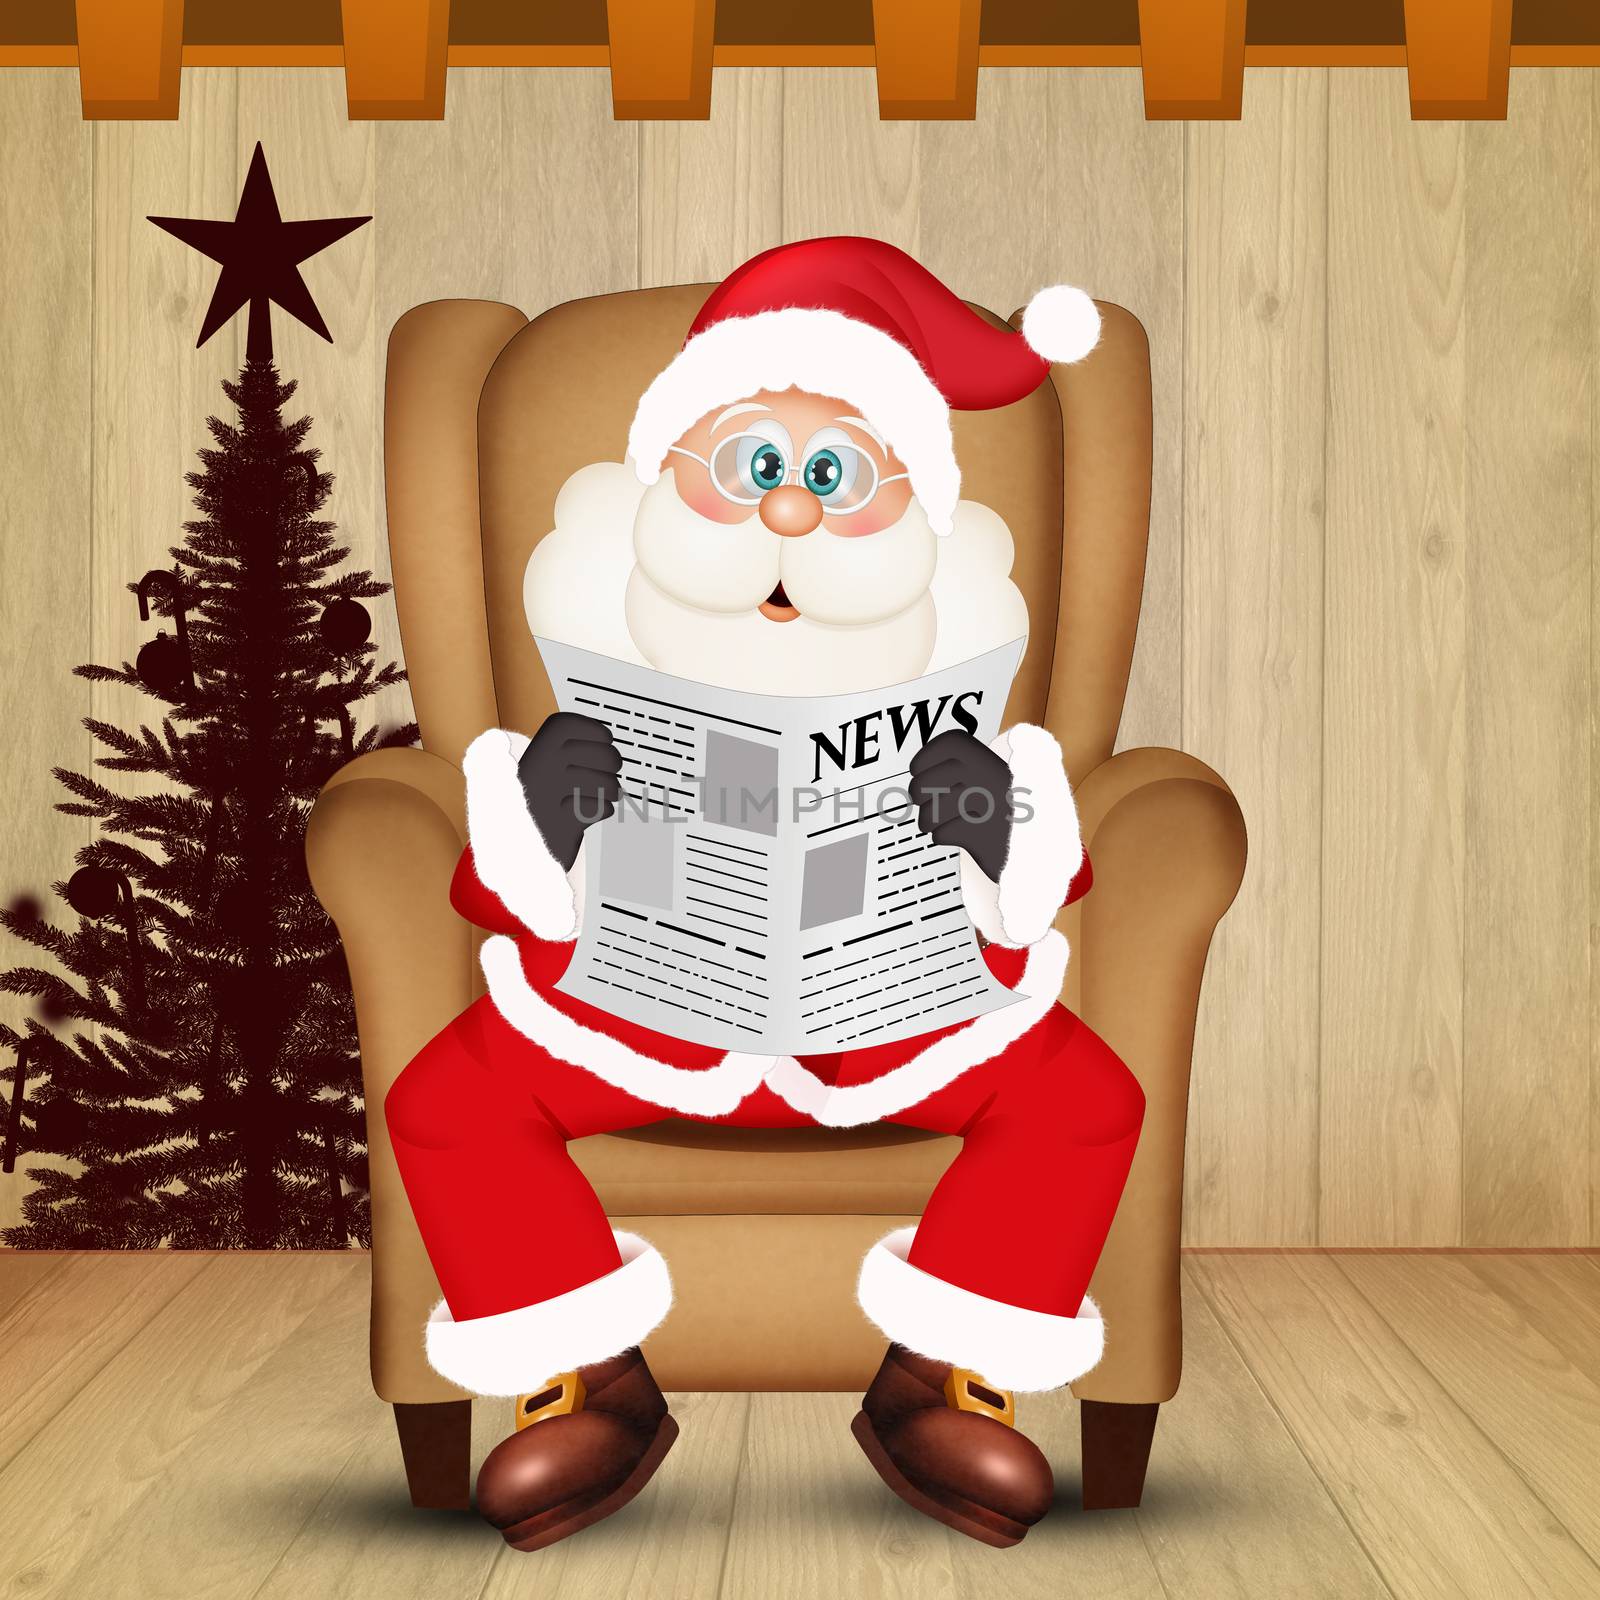 Santa Claus sitting in an armchair reads the newspaper by adrenalina